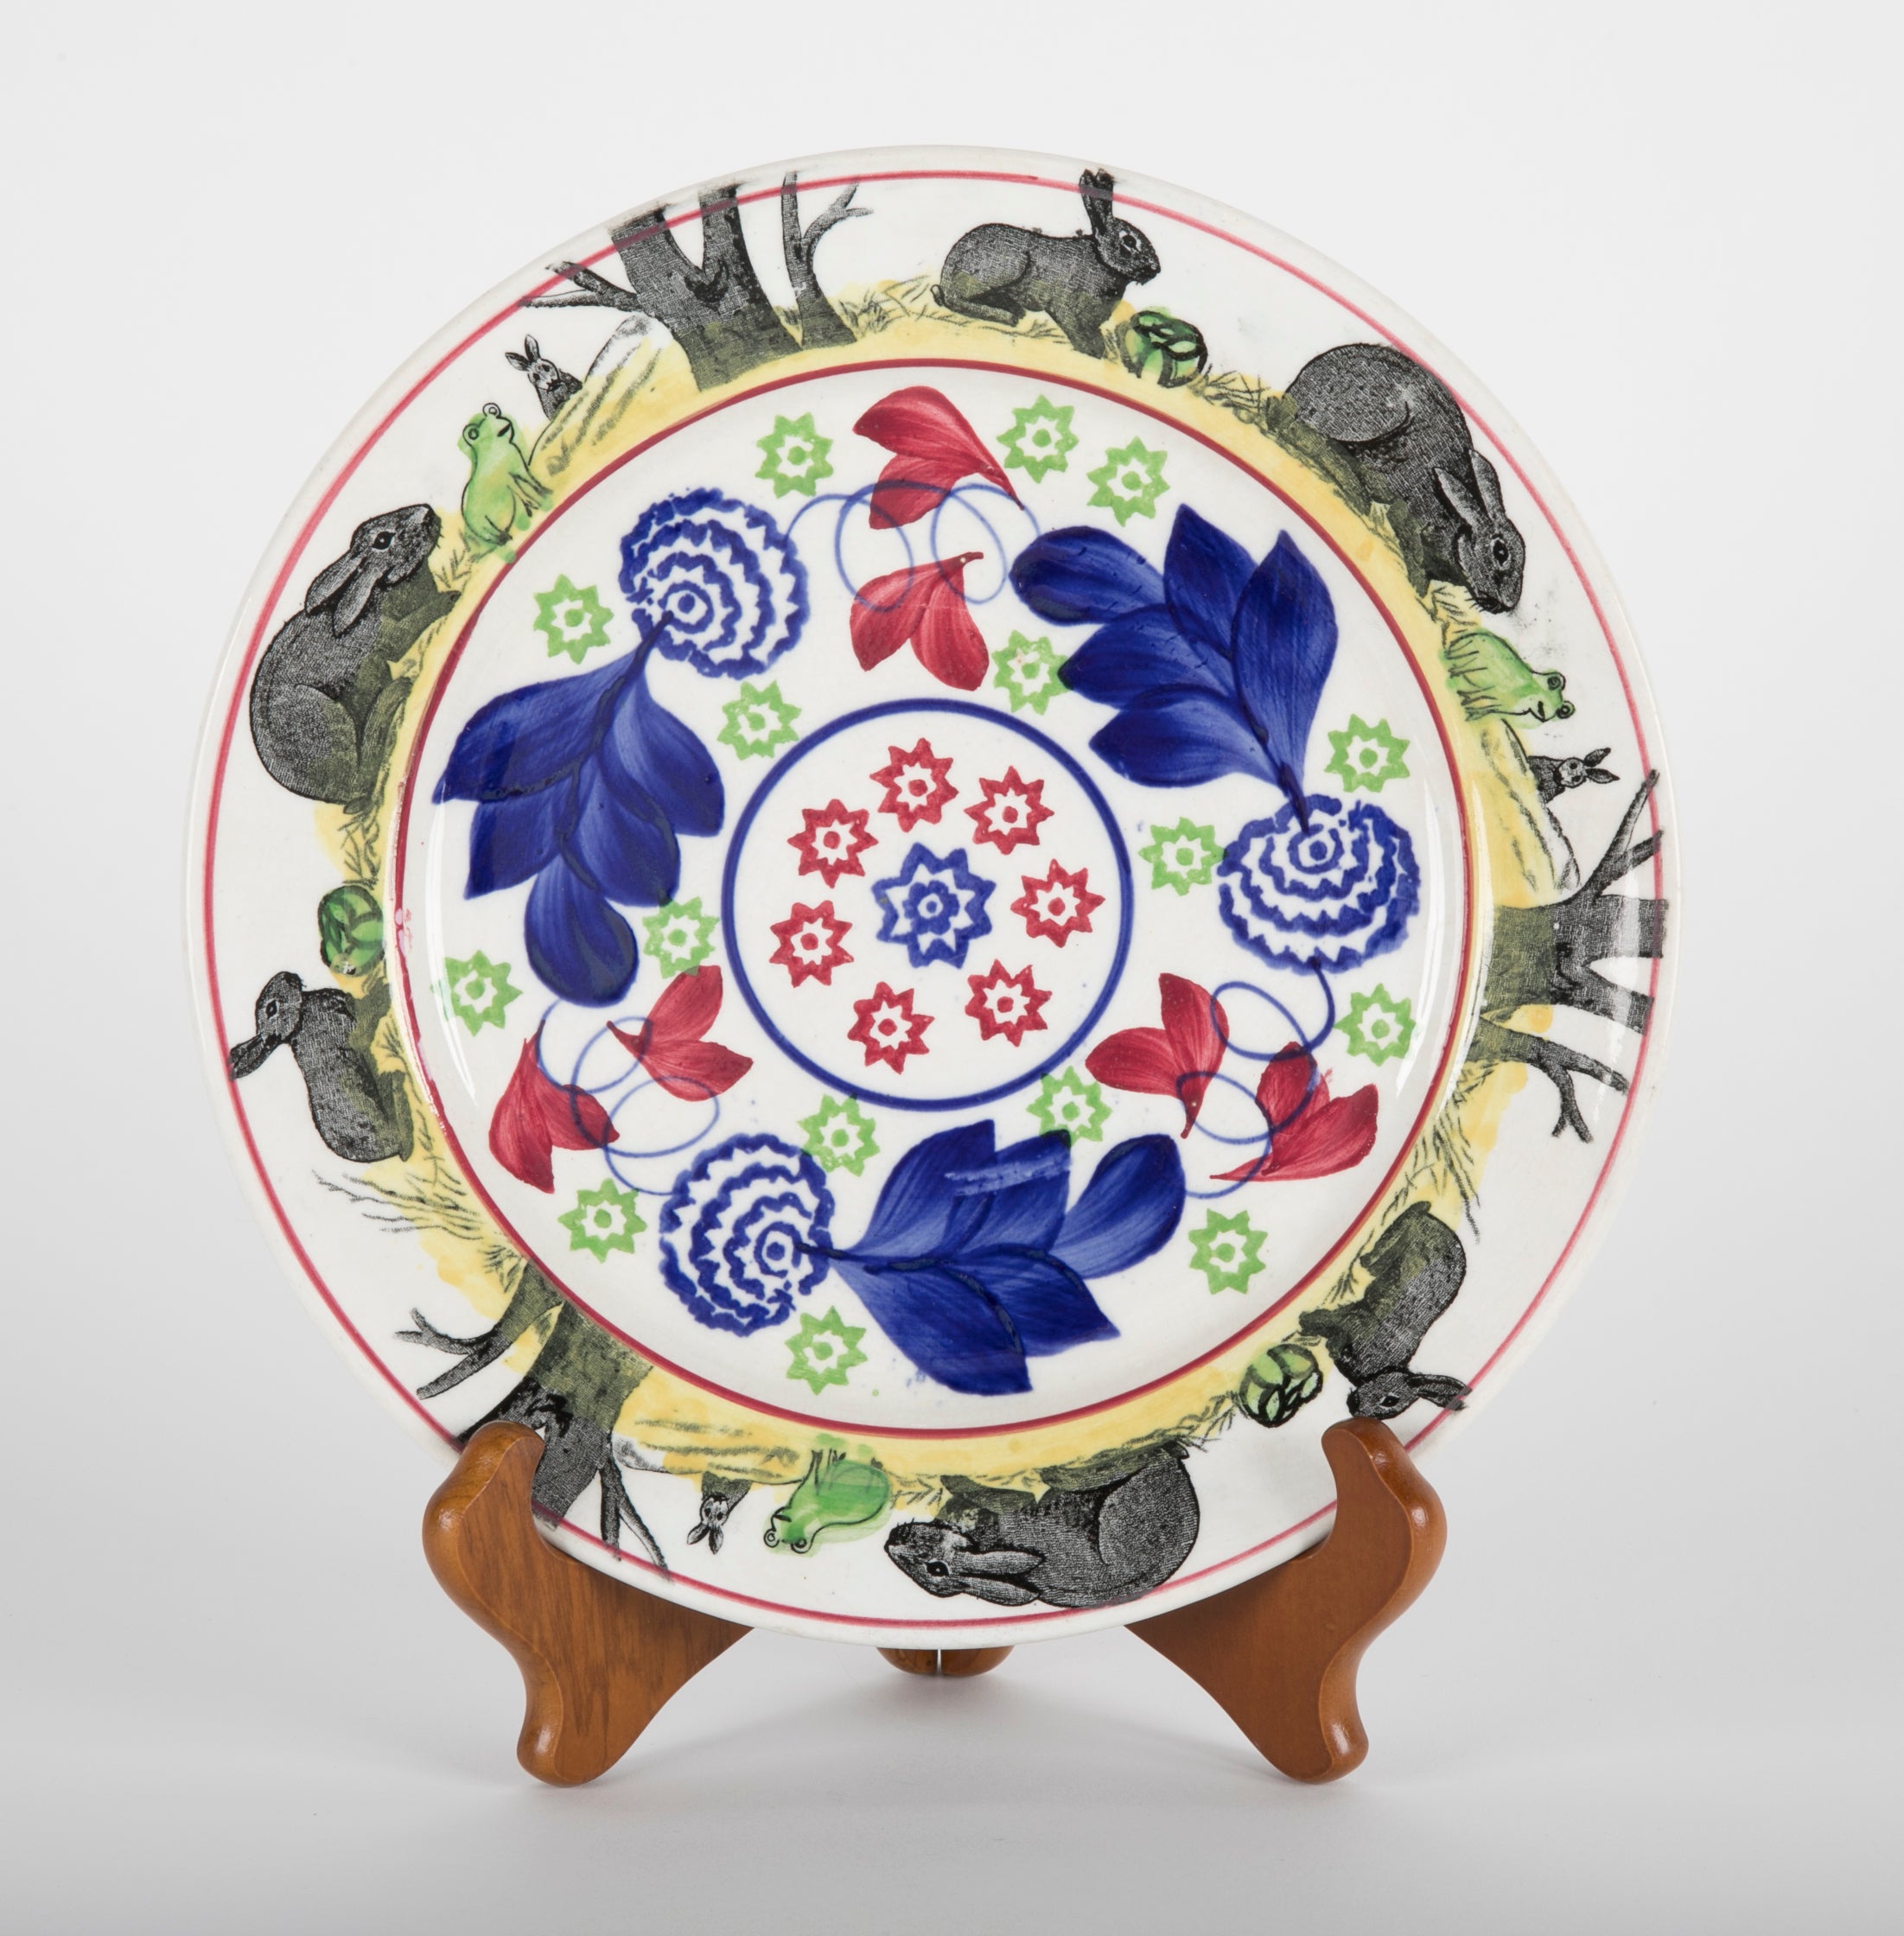 English "Rabbitware" Plates with Various Scenes & Patterns